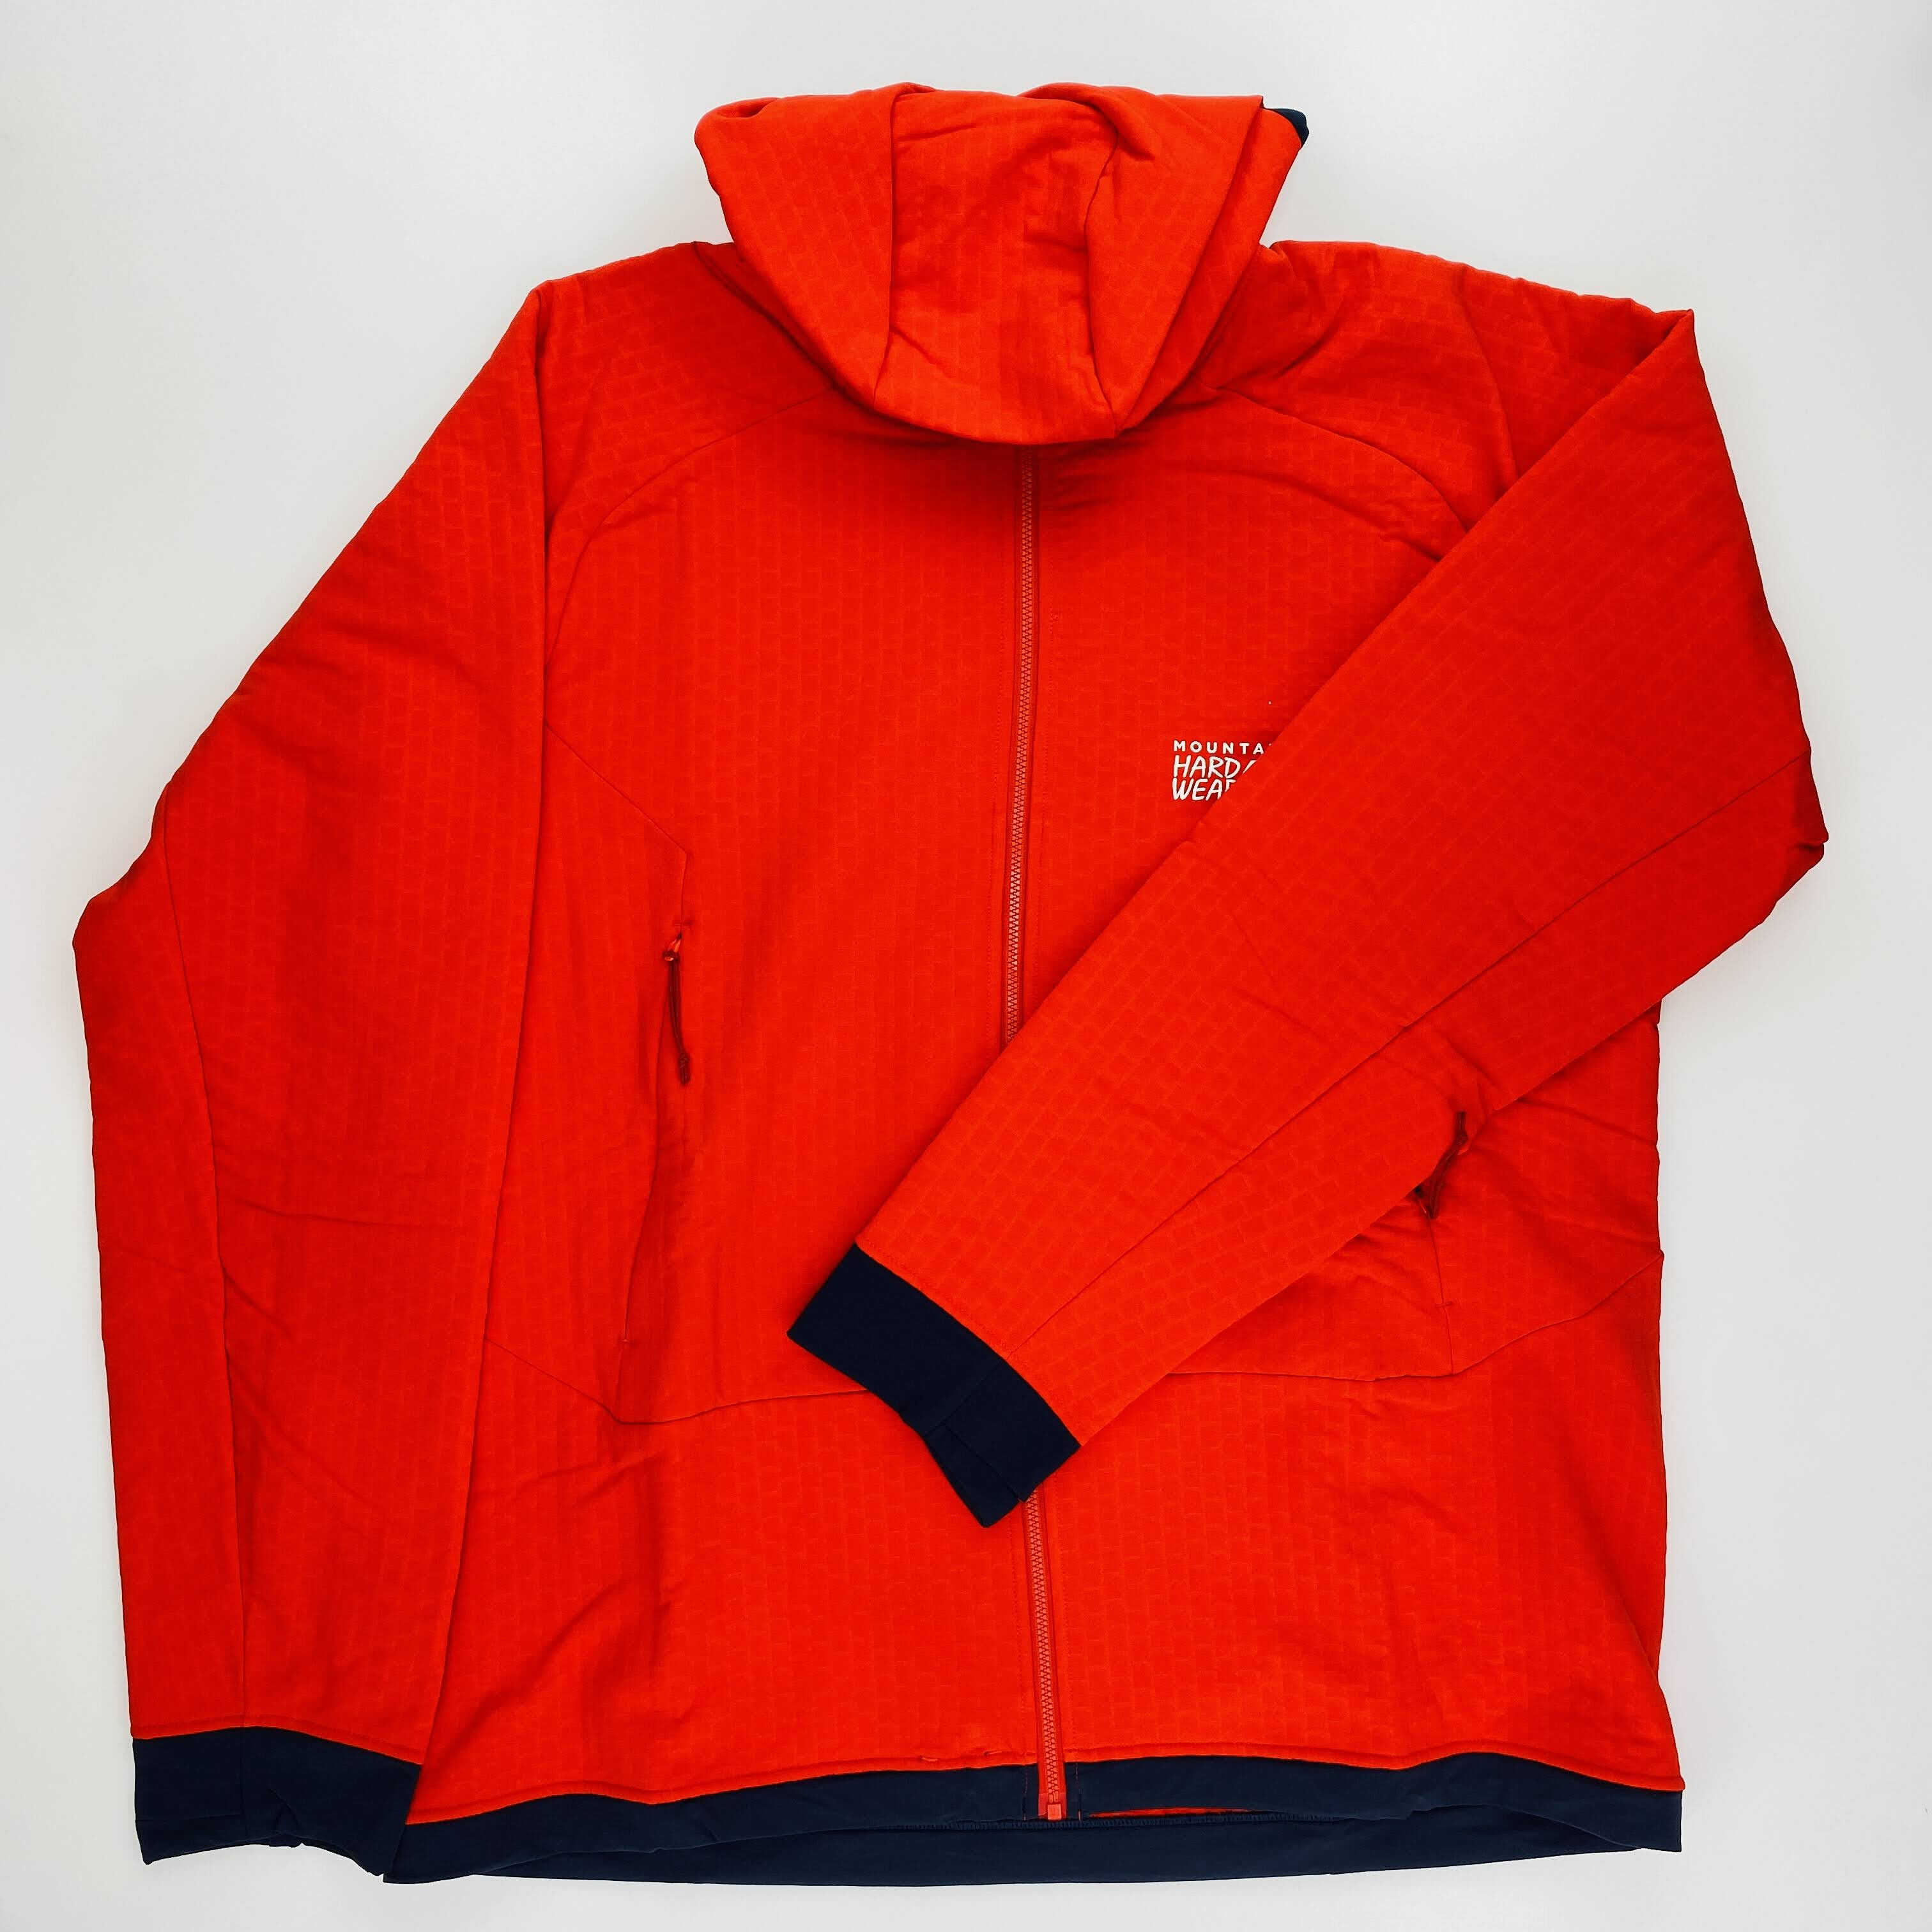 Mountain Hardwear Keele Ascent Man Hoody - Seconde main Polaire homme - Rouge - XL | Hardloop